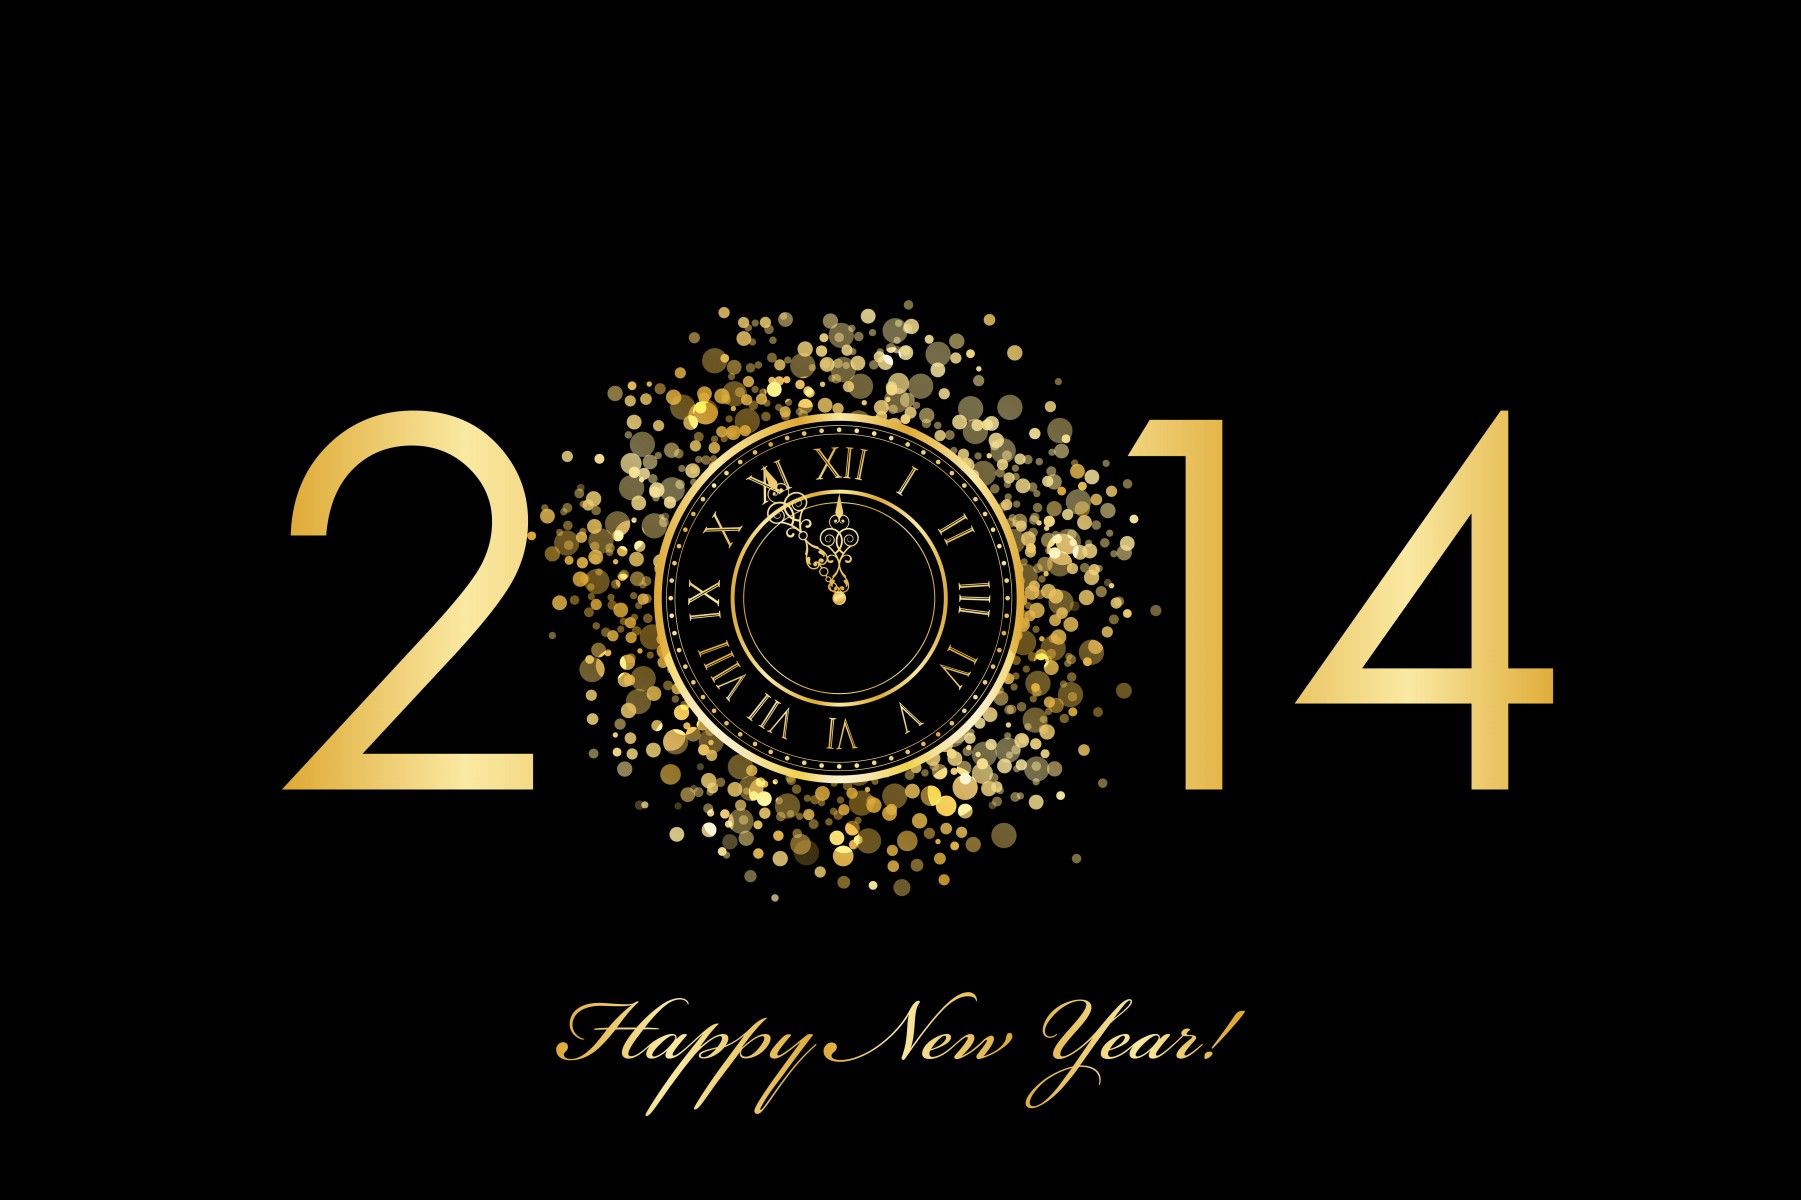 30 Outstanding New Year Wallpaper For 2015 - ImpFashion - All News ...